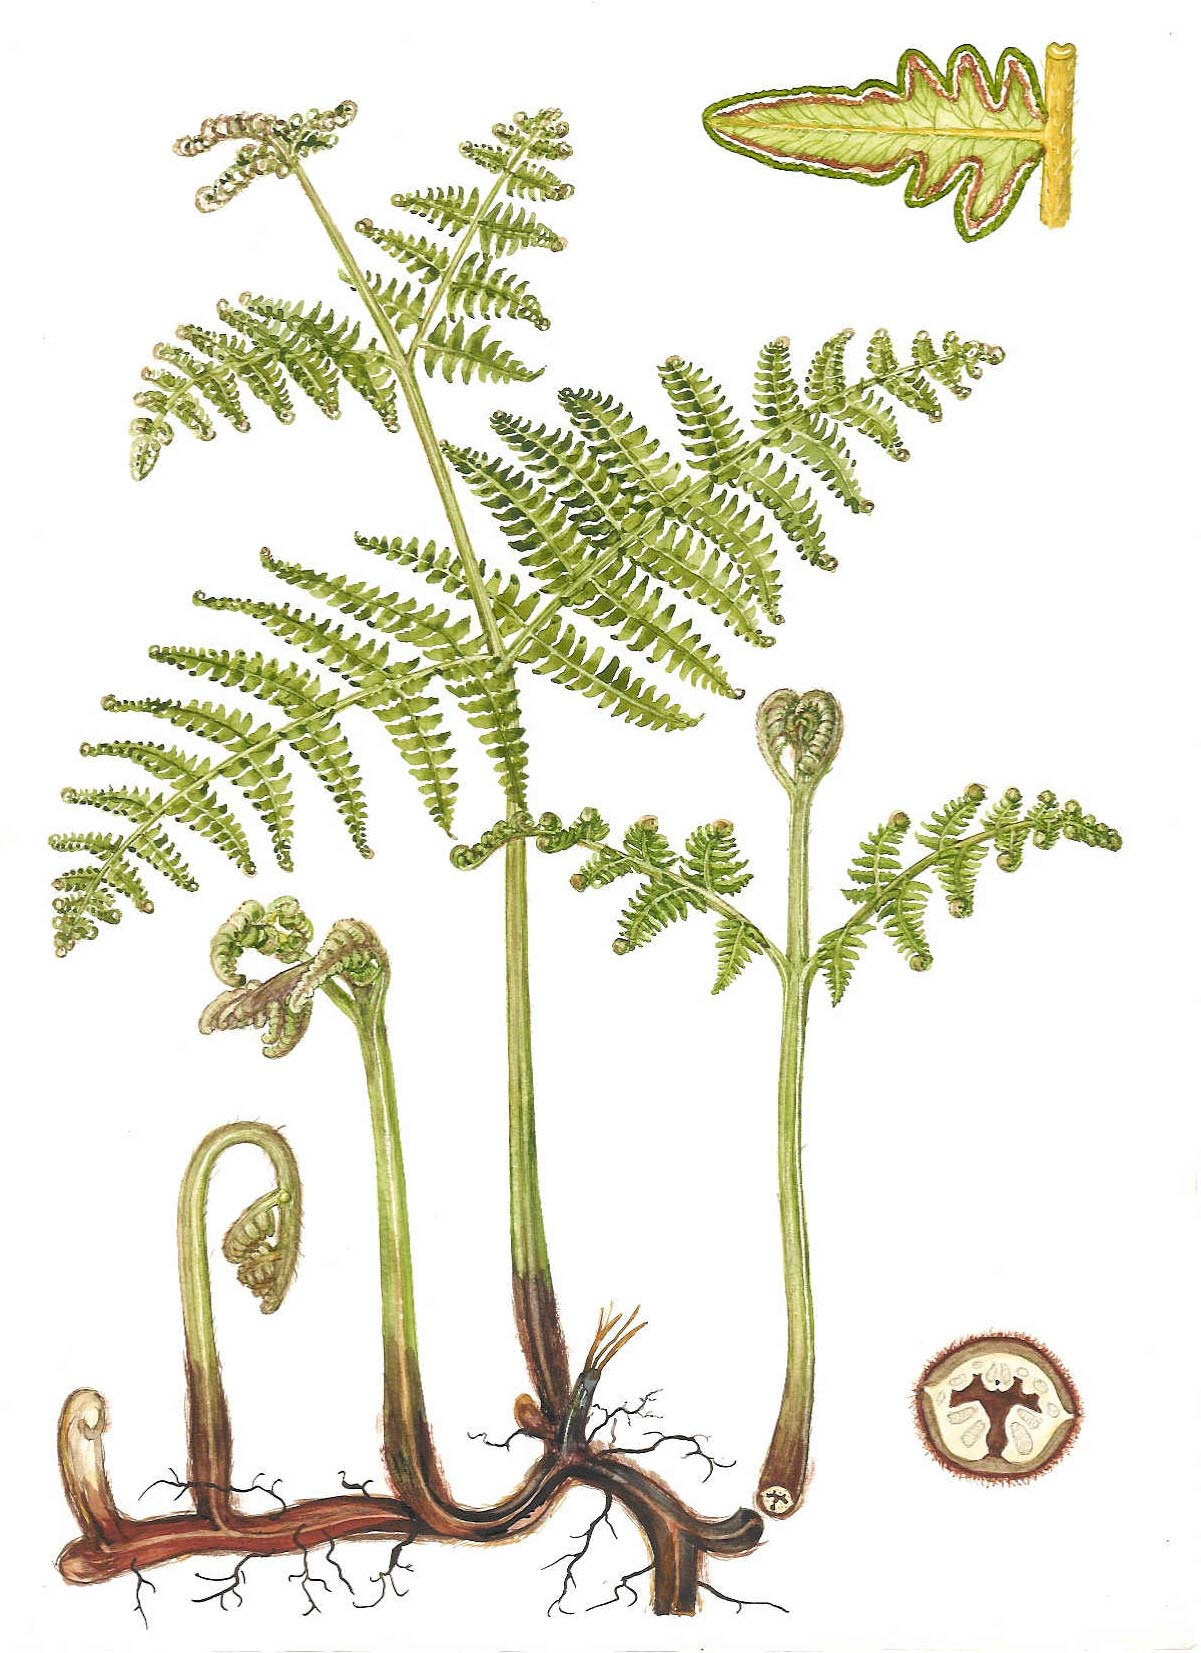 Pteridium aquilinum . Habit with rachis cross-section at lower right 